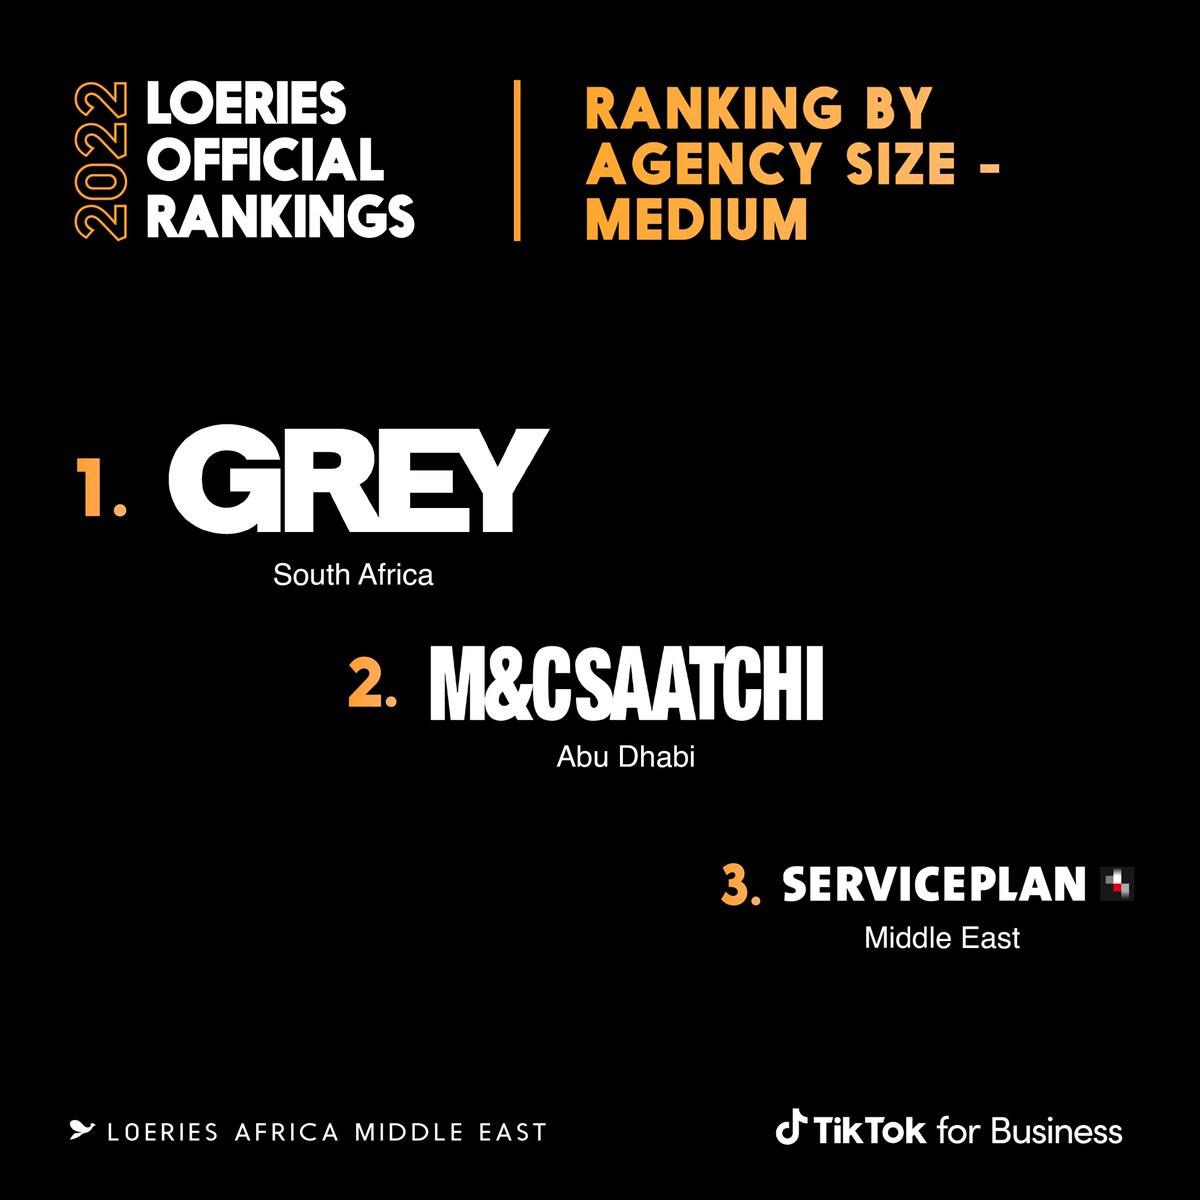 The Loeries are excited to congratulate the highest-ranking medium agencies in the region. #Loeries #LoeriesOfficialRankings2022 #creativity